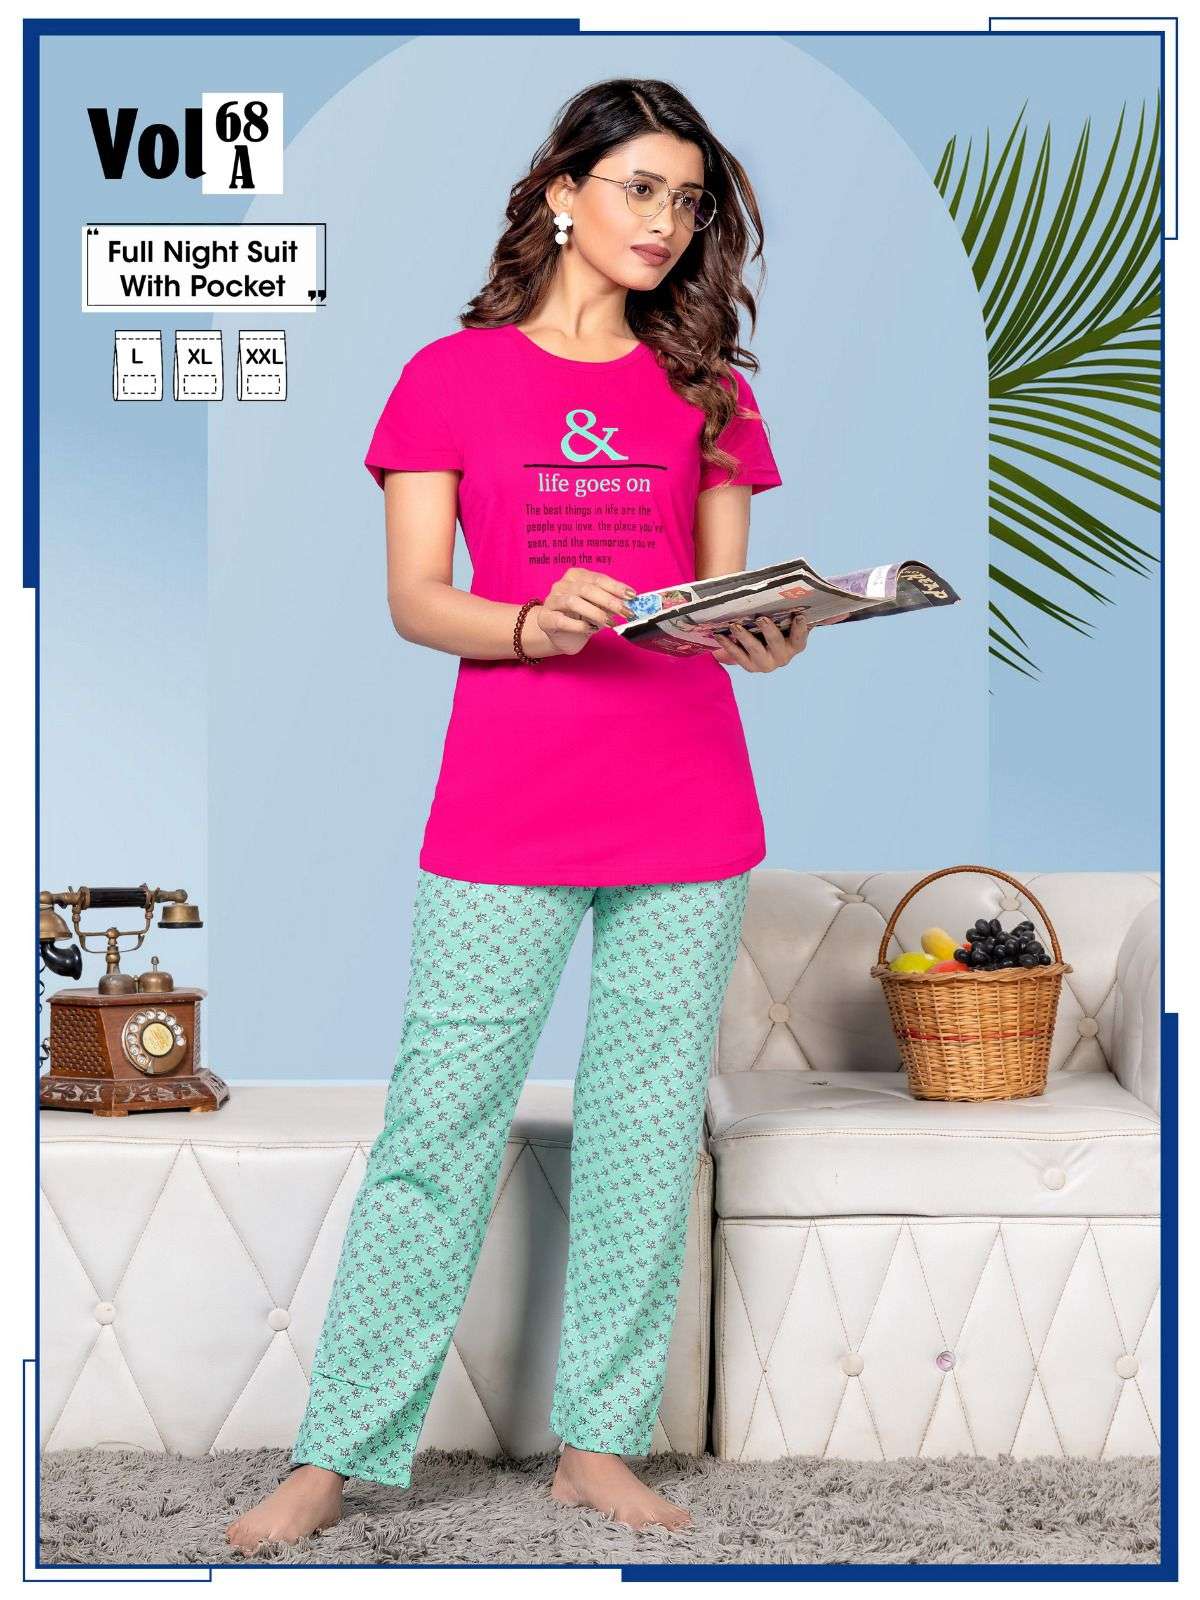 PLATINUM VOL.68 A Heavy Shinker Hosiery Cotton Night Suits With Pocket CATALOG WHOLESALER BEST RATE